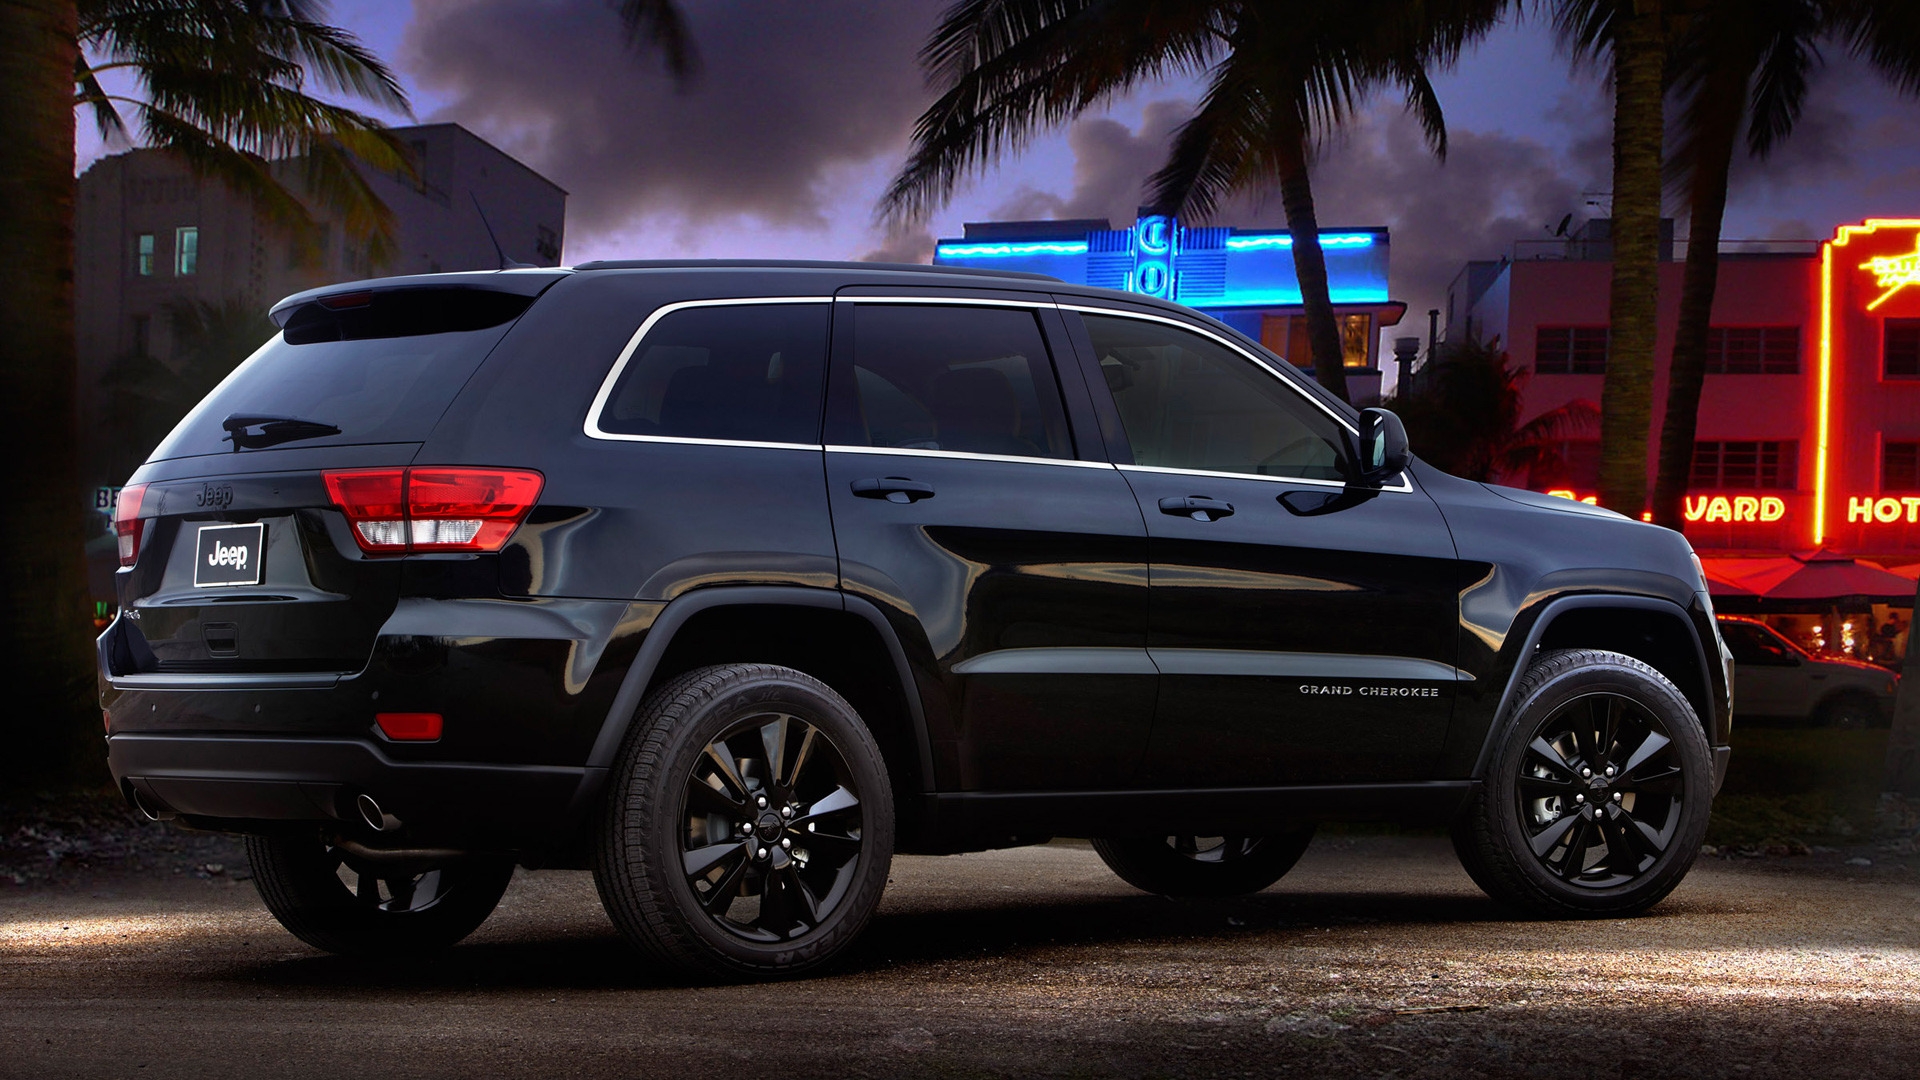 Jeep Grand Cherokee Rear Concept for 1920 x 1080 HDTV 1080p resolution